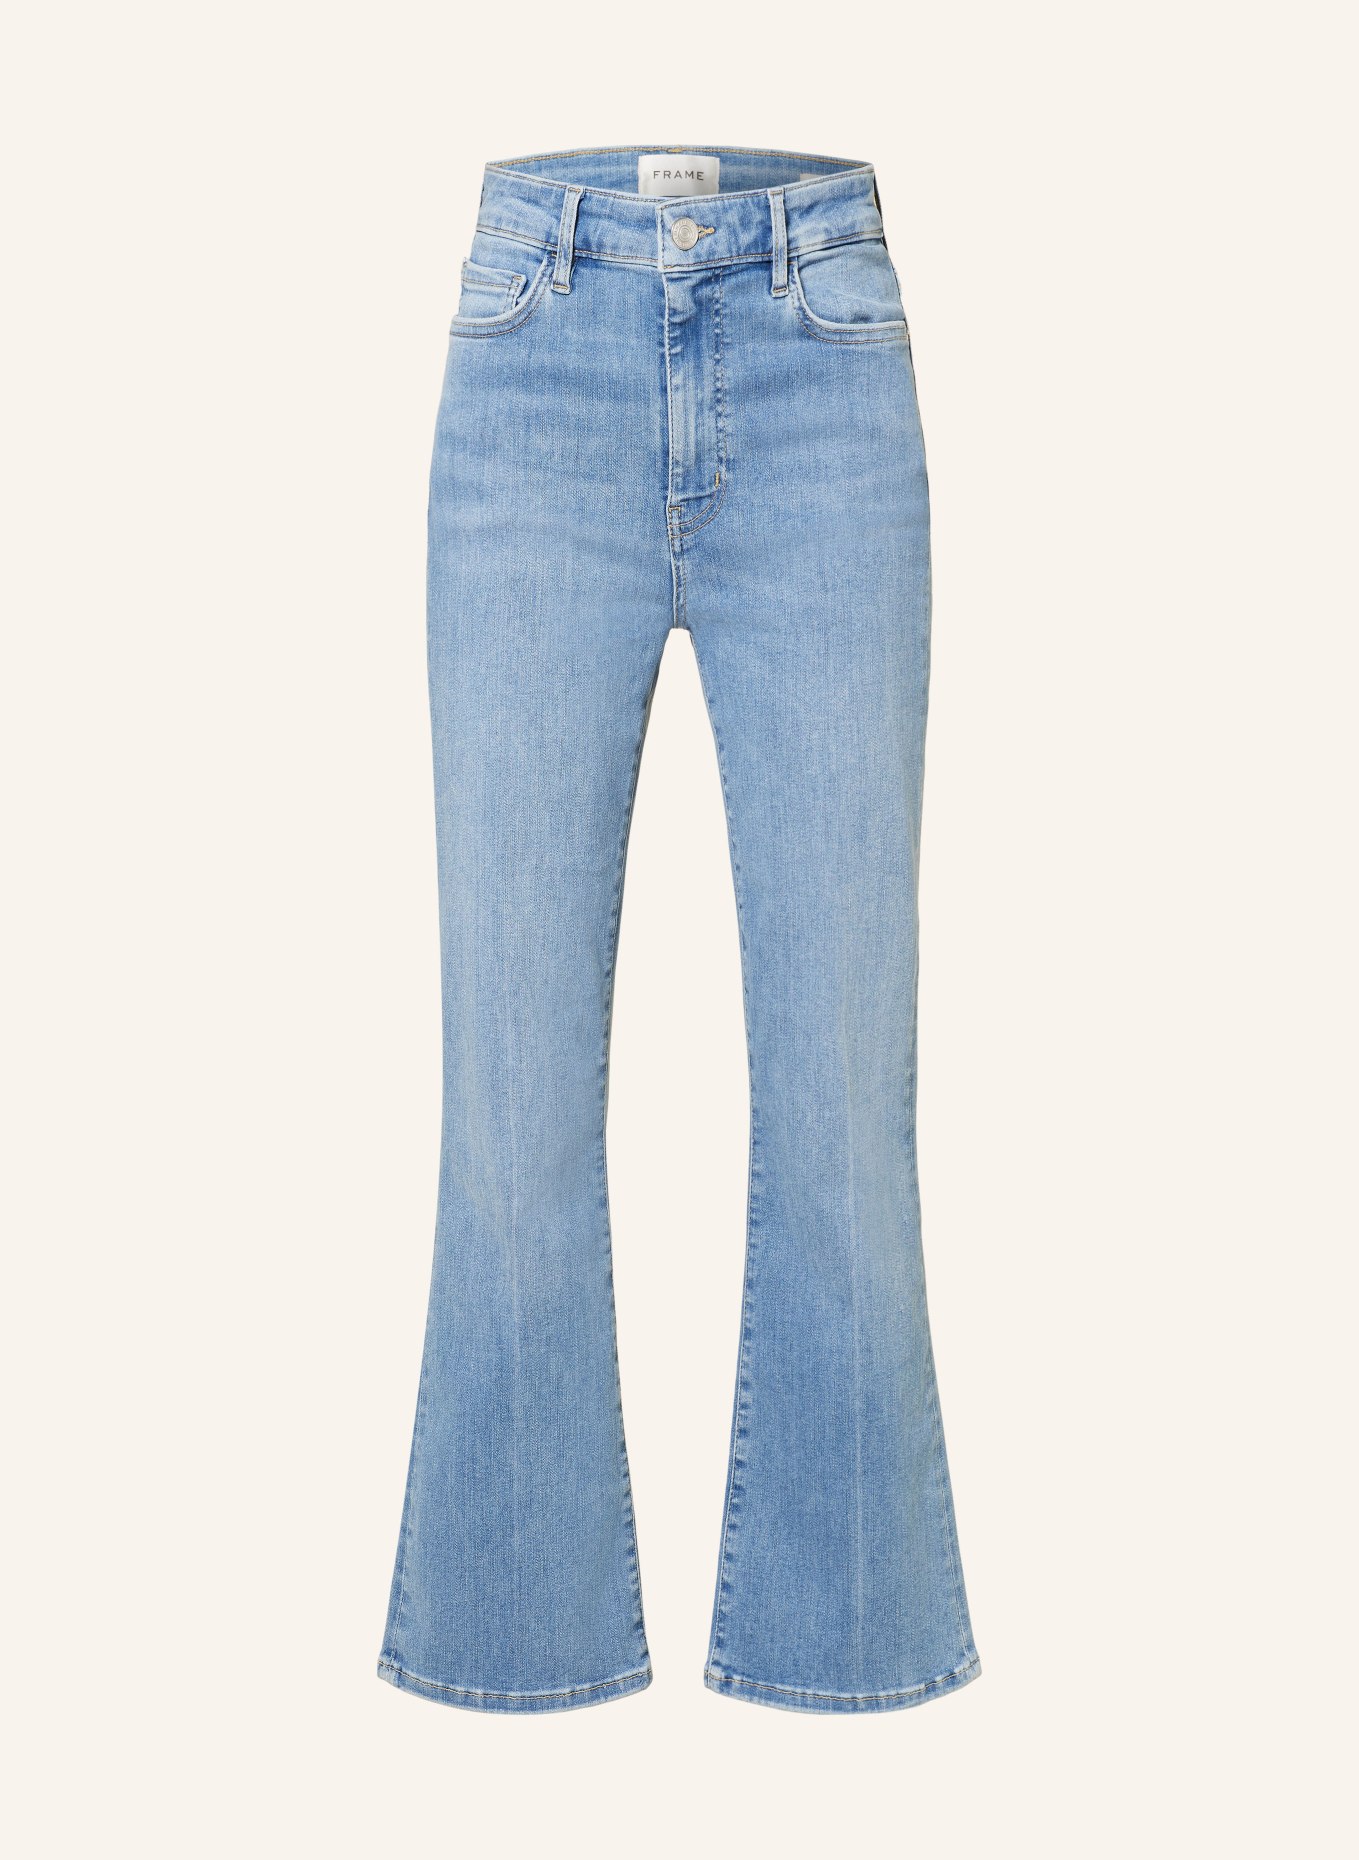 FRAME Bootcut Jeans LE CROP MINI BOOT, Farbe: CLRW CLEARWATER (Bild 1)